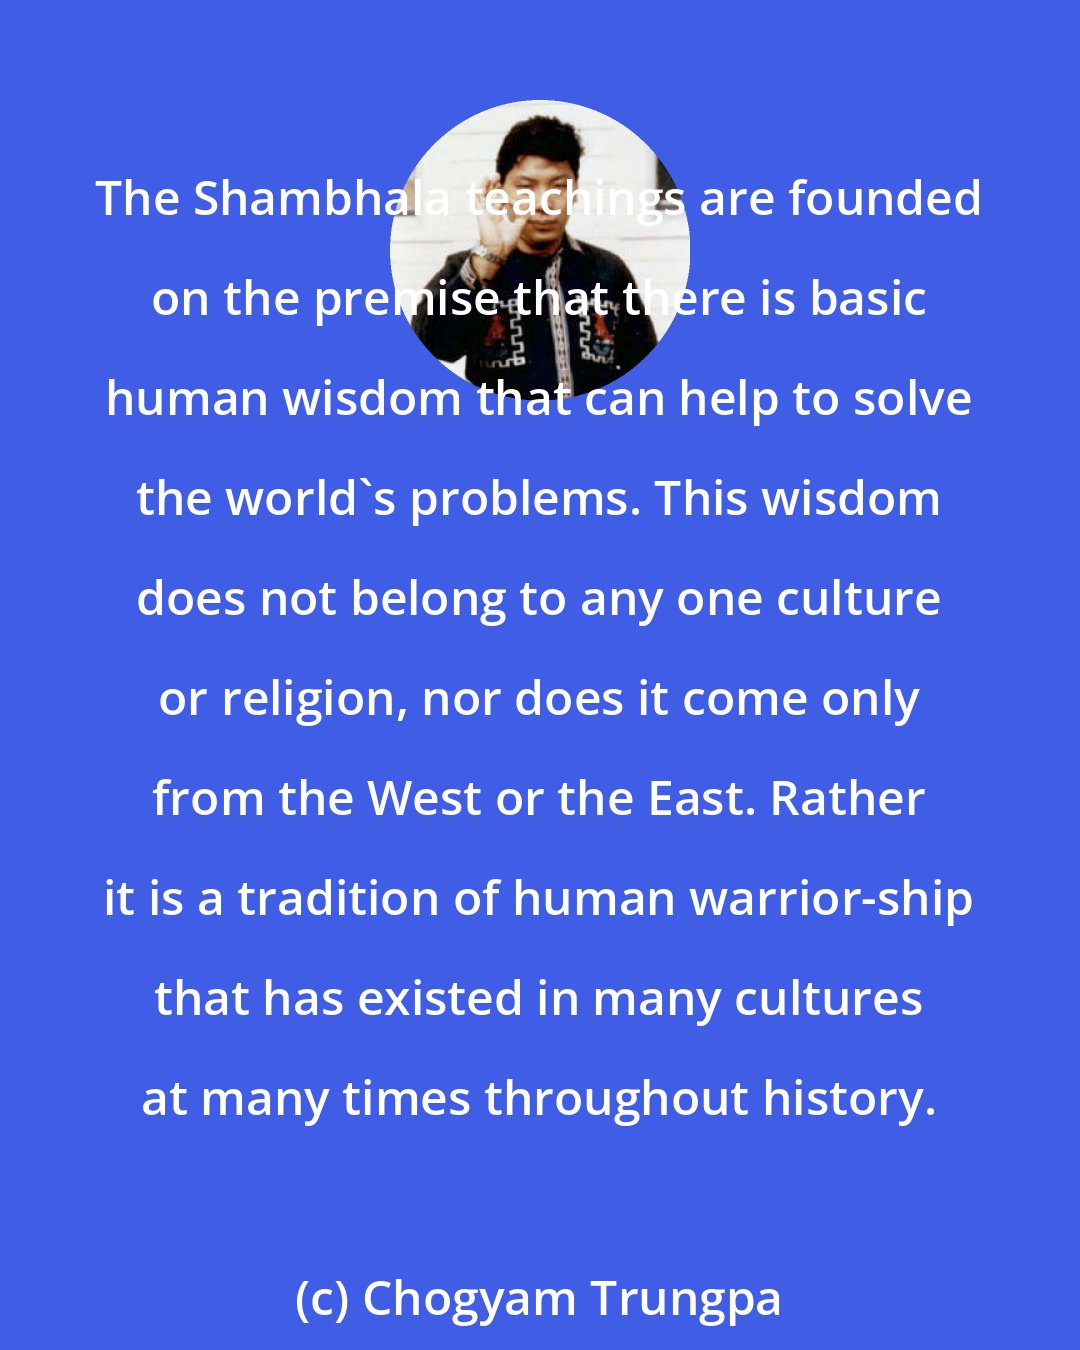 Chogyam Trungpa: The Shambhala teachings are founded on the premise that there is basic human wisdom that can help to solve the world's problems. This wisdom does not belong to any one culture or religion, nor does it come only from the West or the East. Rather it is a tradition of human warrior-ship that has existed in many cultures at many times throughout history.